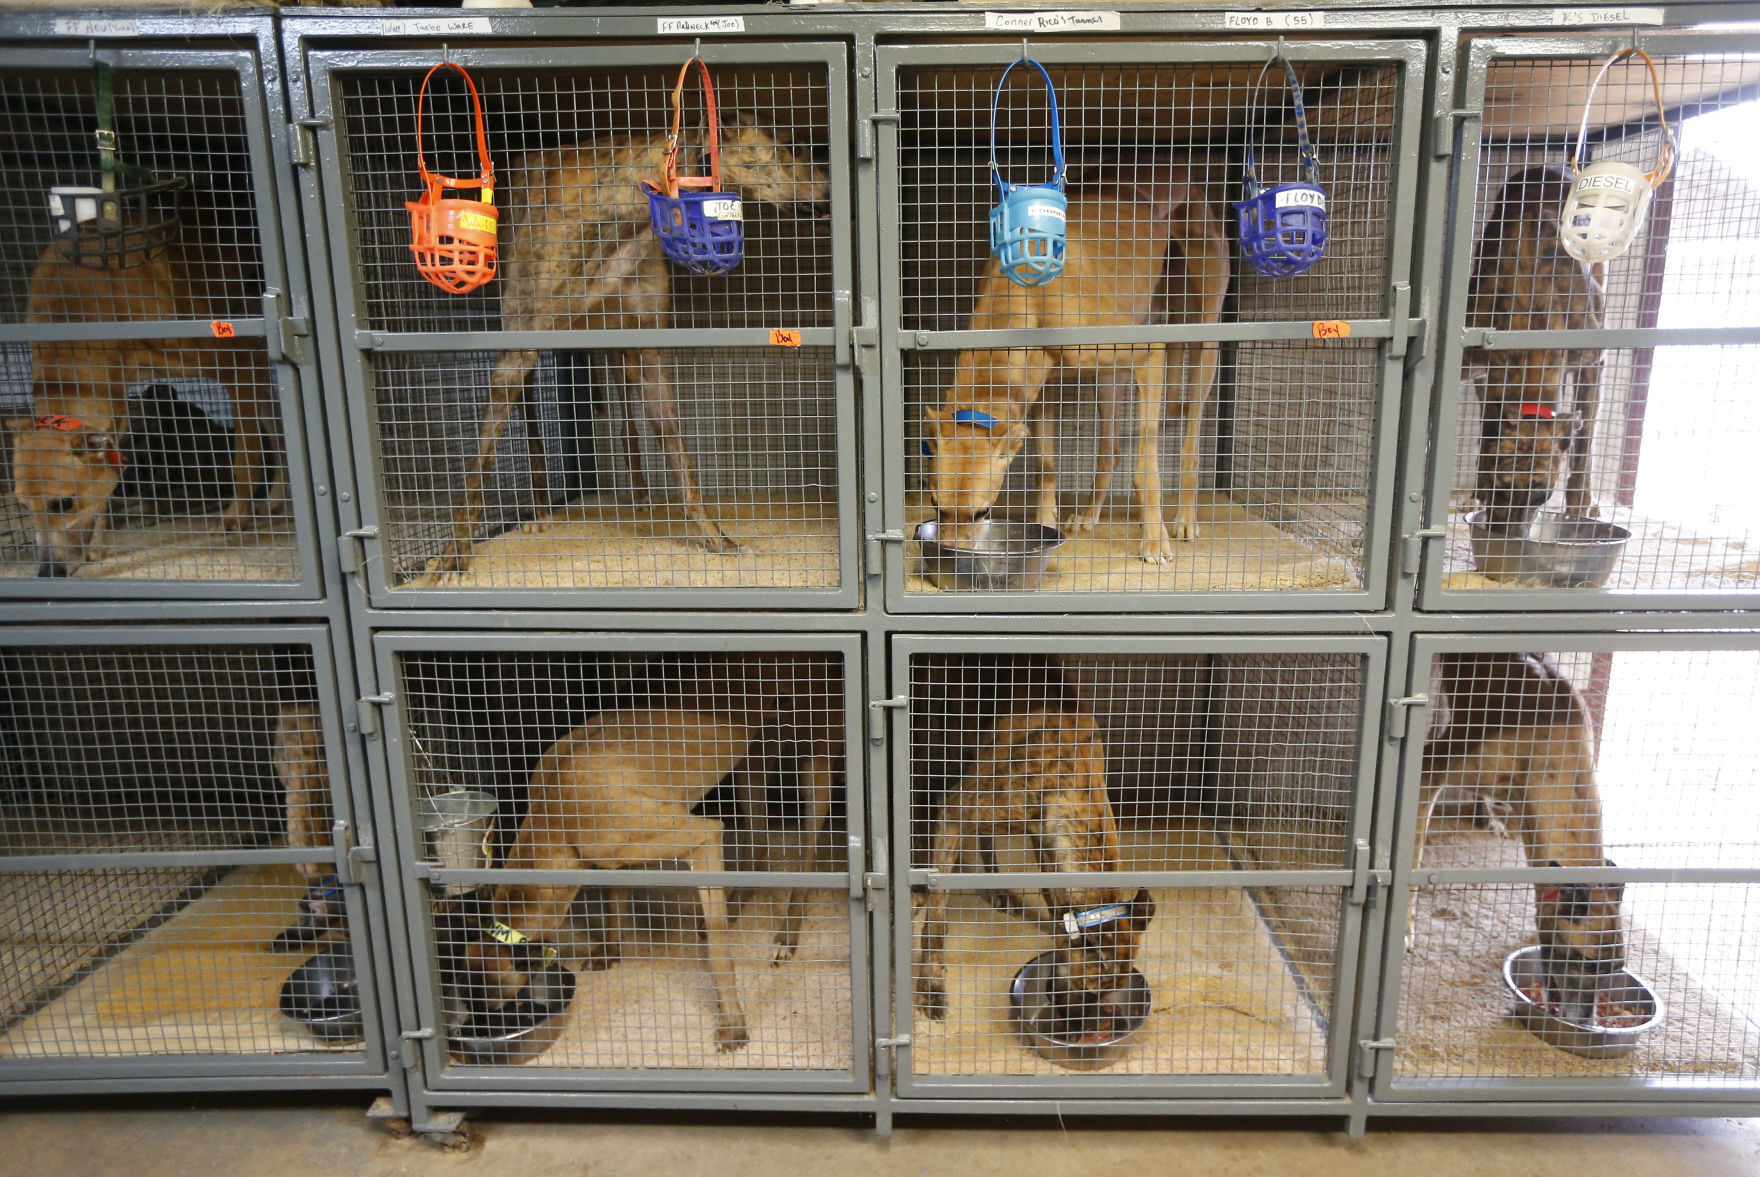 Greyhounds feed just before being let outside on Tuesday at the Iowa Greyhound Park.    PHOTO CREDIT: Dave Kettering